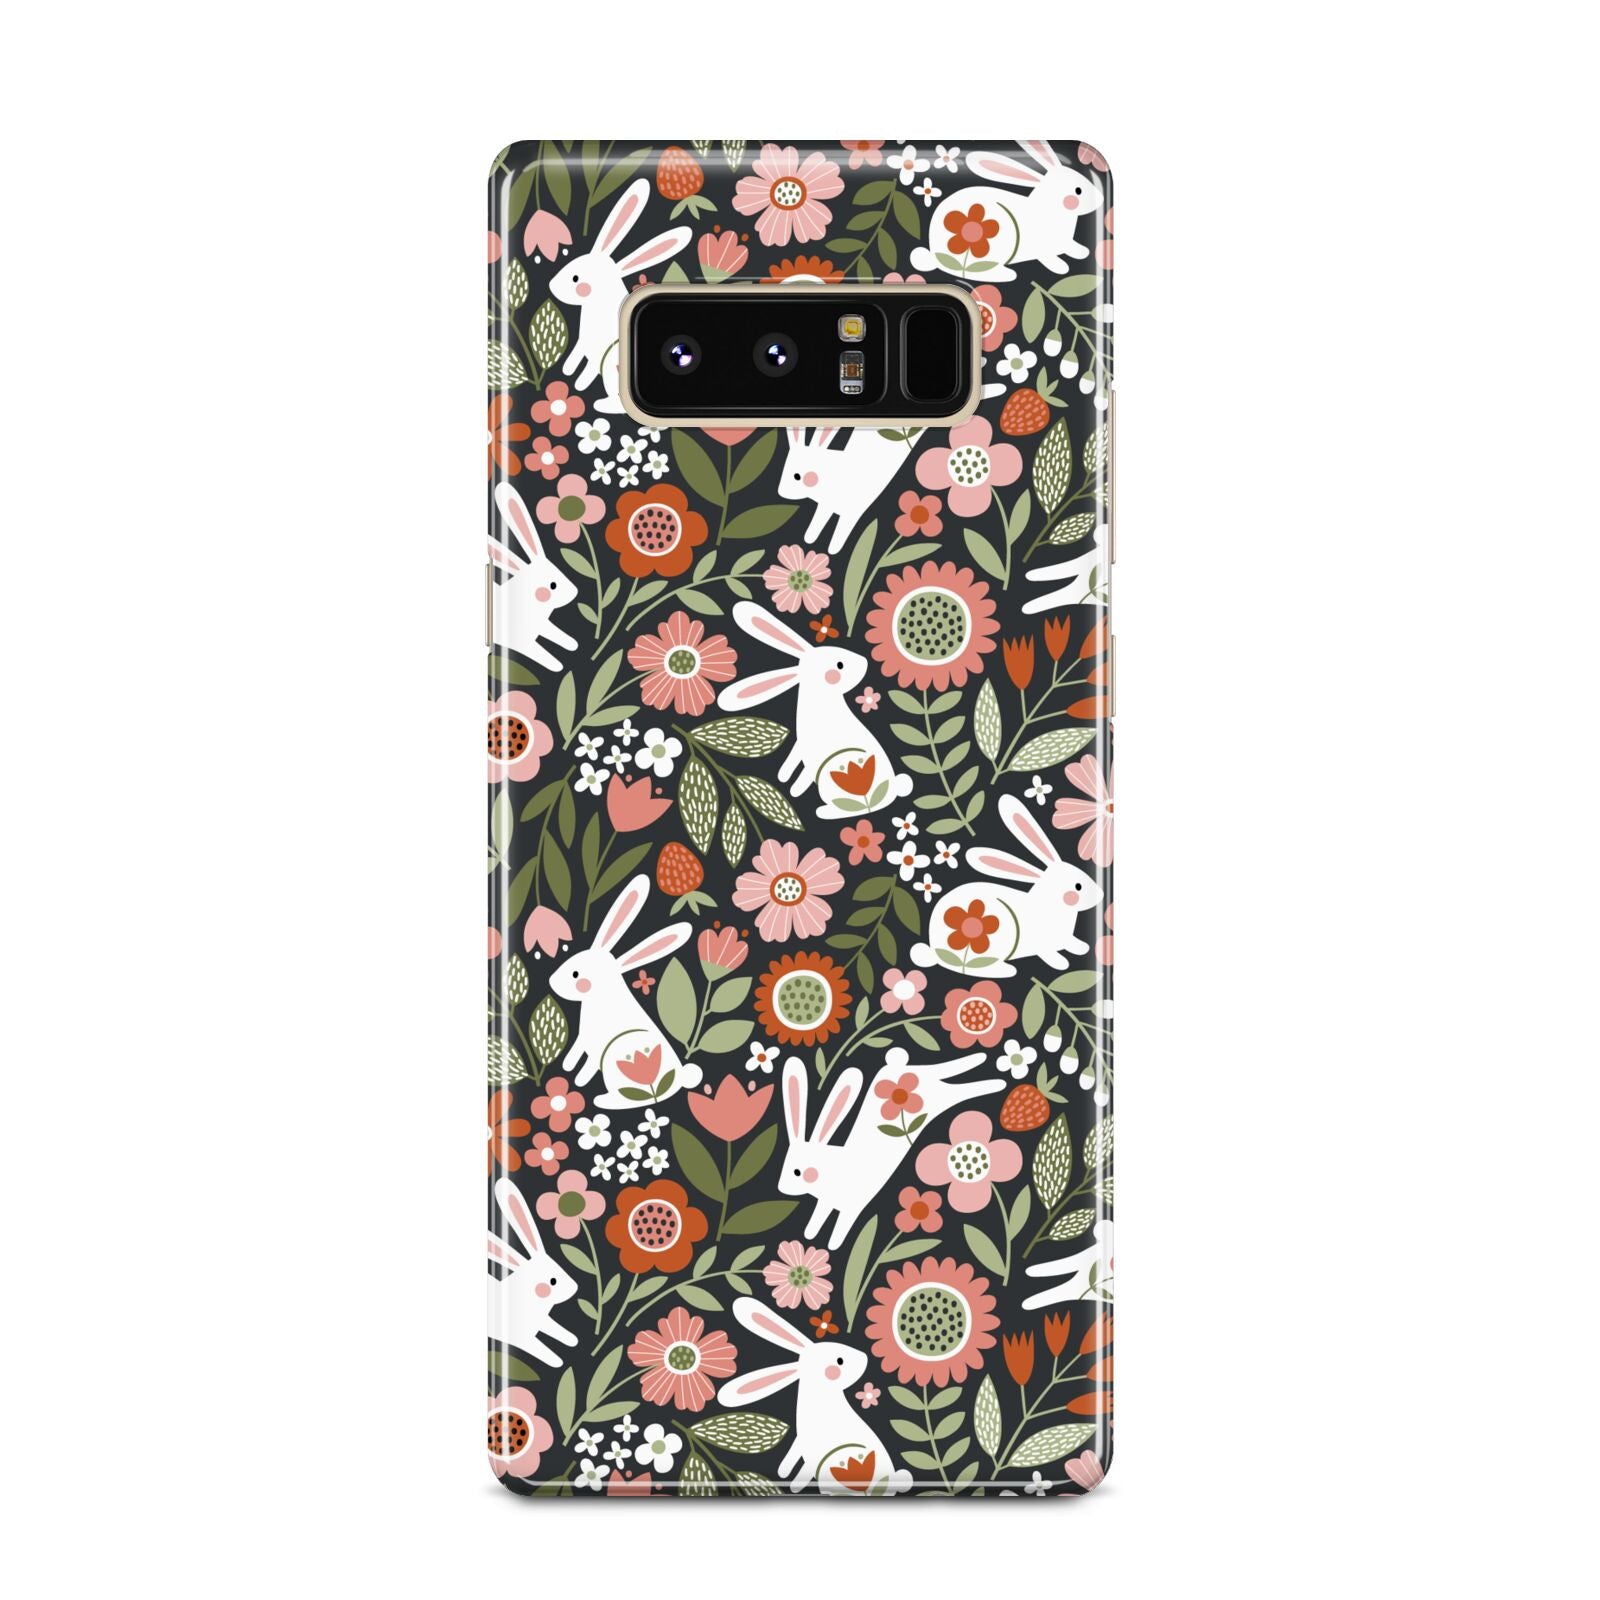 Easter Floral Samsung Galaxy Note 8 Case